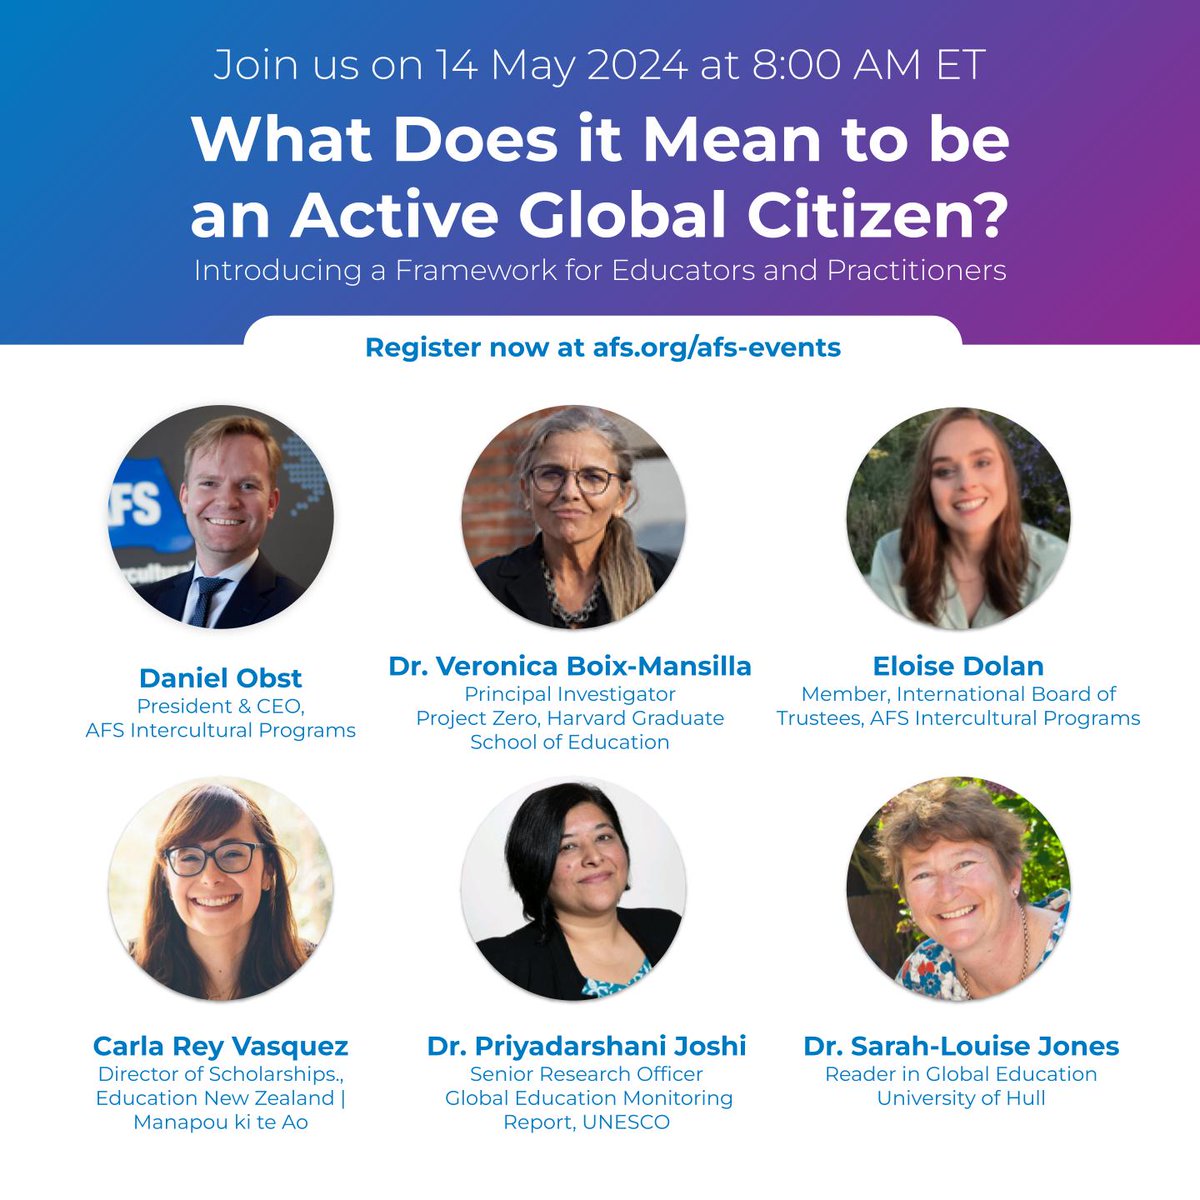 What does it mean to be an active global citizen? Join a global launch of a Framework for educators & practitioners on May 14. Register now to gain insights on leveraging the Framework to develop active global citizens. afs.org/afs-events/#af… #AFSeffect #globalcitizenship